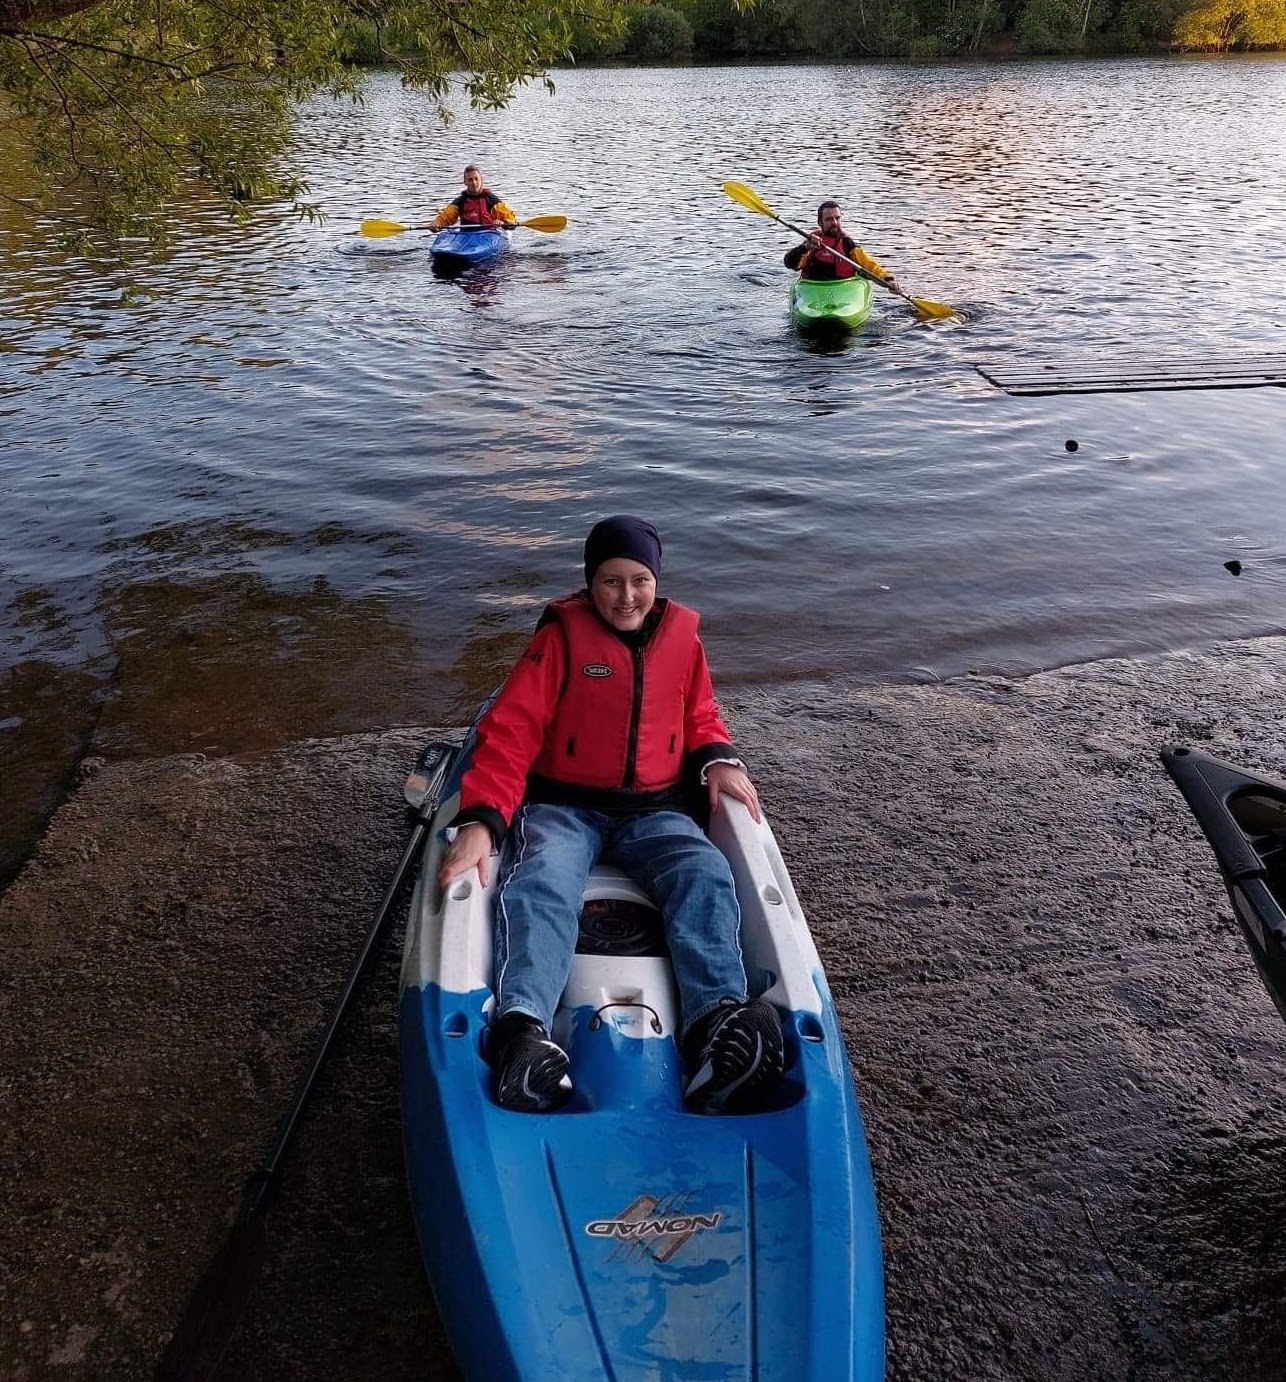 The image shows Isabelle sat in a kayak on concrete near a lake. There are two people in kayaks on the water behind her, with trees in the background.